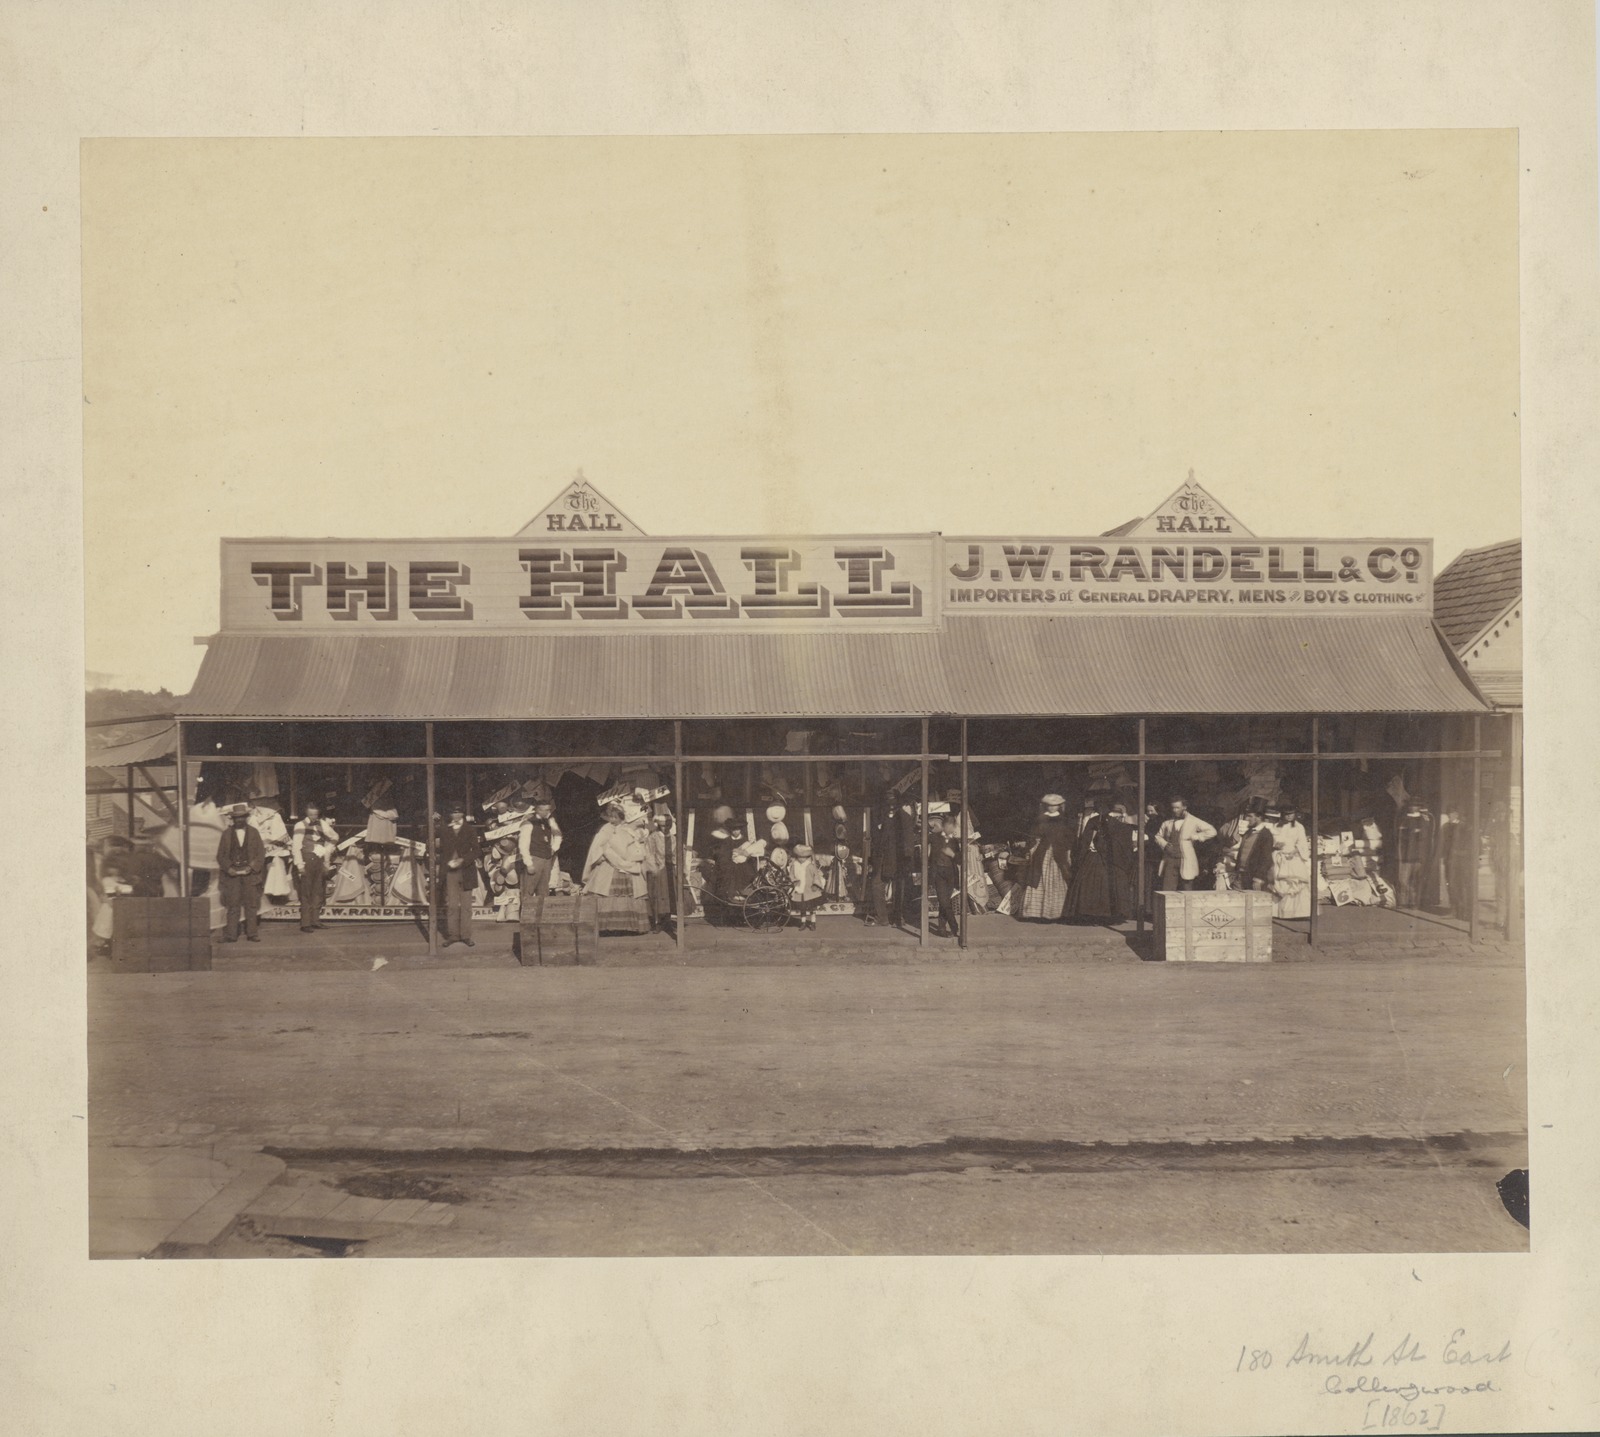 The Hall J. W. Randell & Co. Importers of general drapery mens and boys clothing